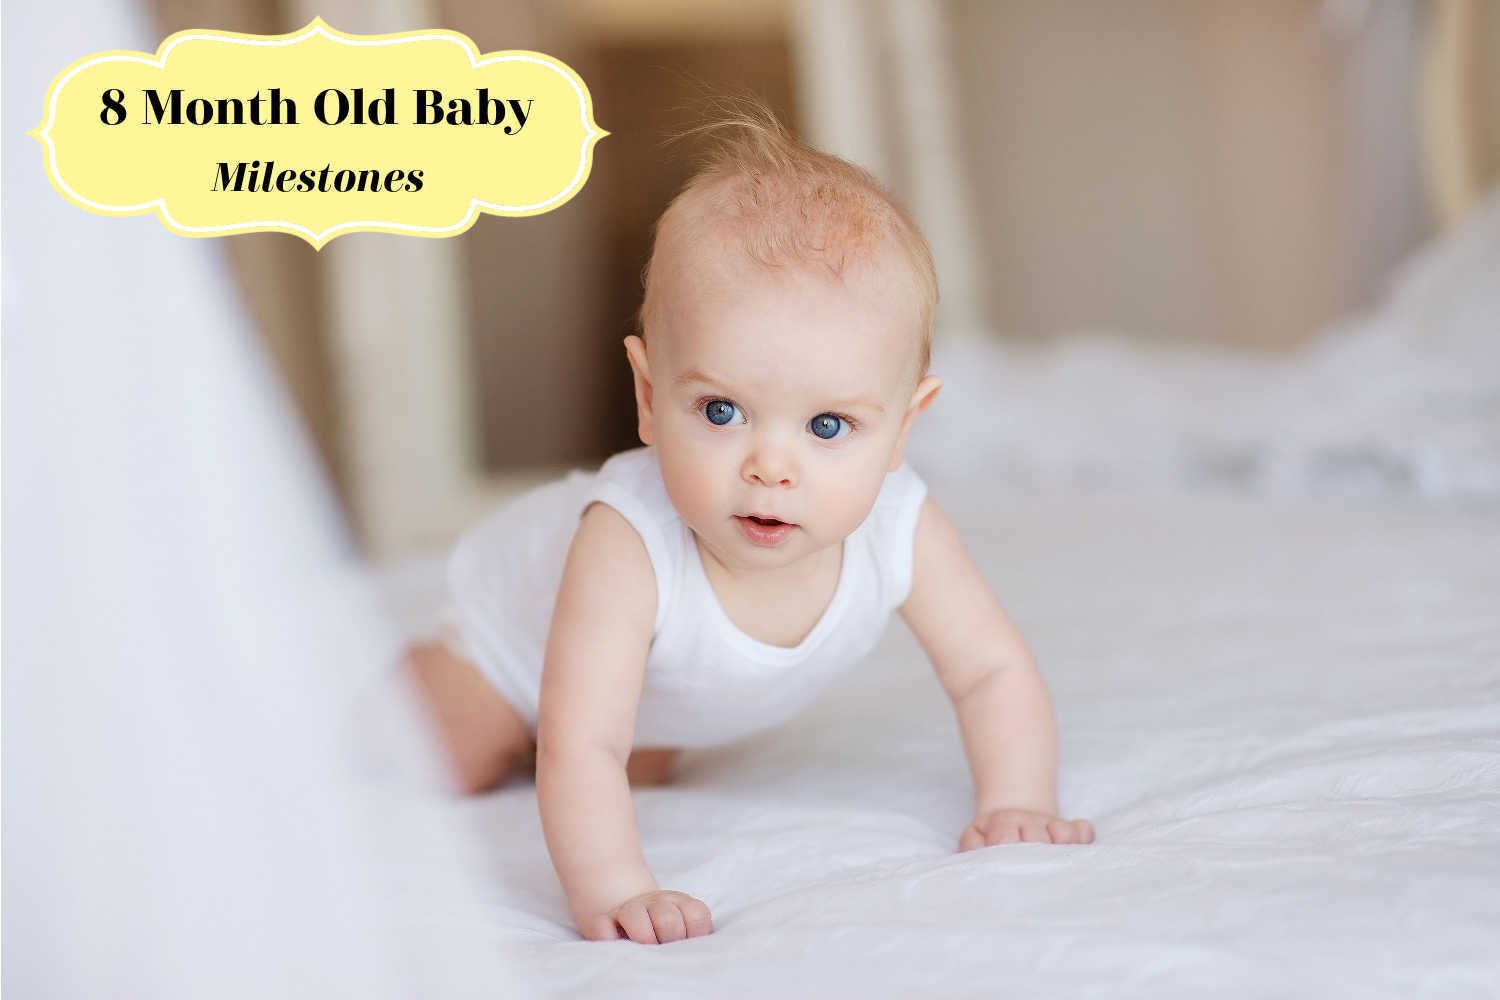 8 Month Old Baby Milestones – What Are They and How You Can Help